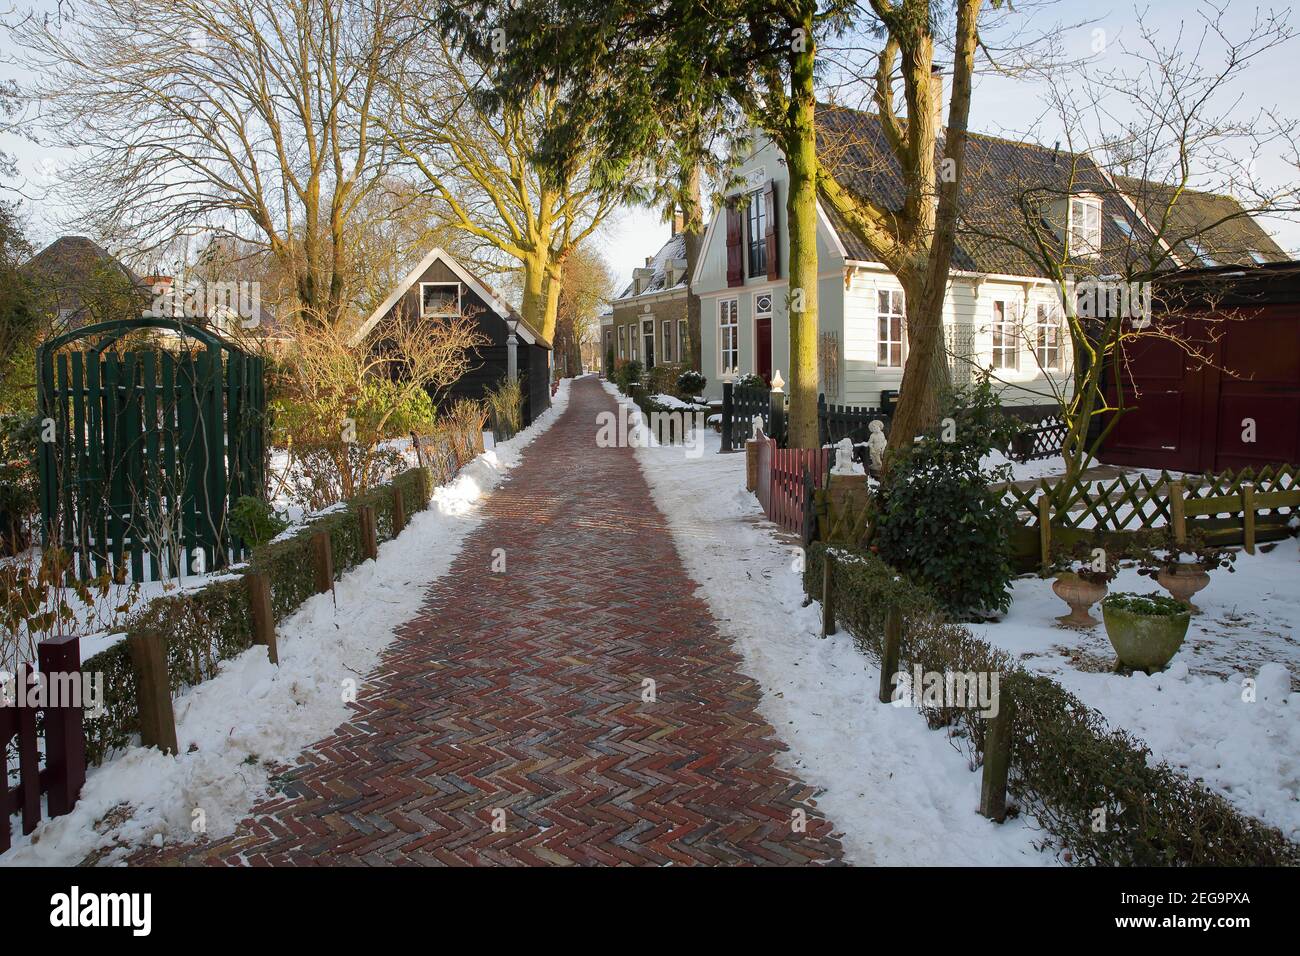 Winter snow in Broek in Waterland, a small town with traditional old and  painted wooden houses, North Holland, Netherlands Stock Photo - Alamy